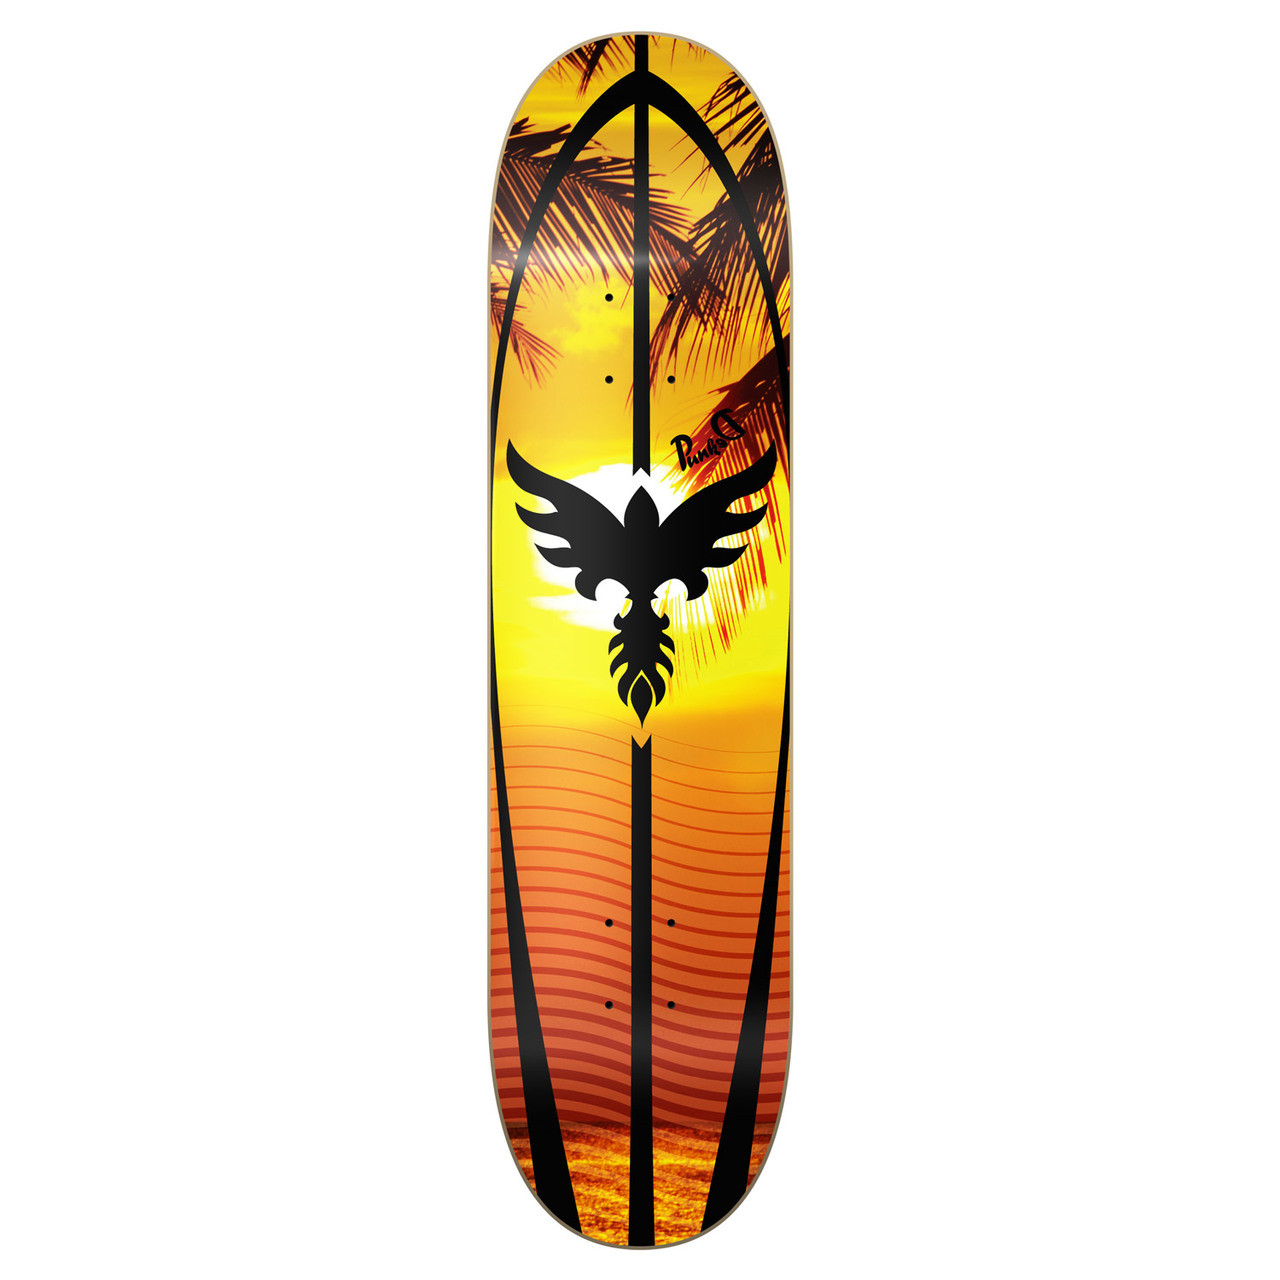 Yocaher Graphic Skateboard Deck - Sunset